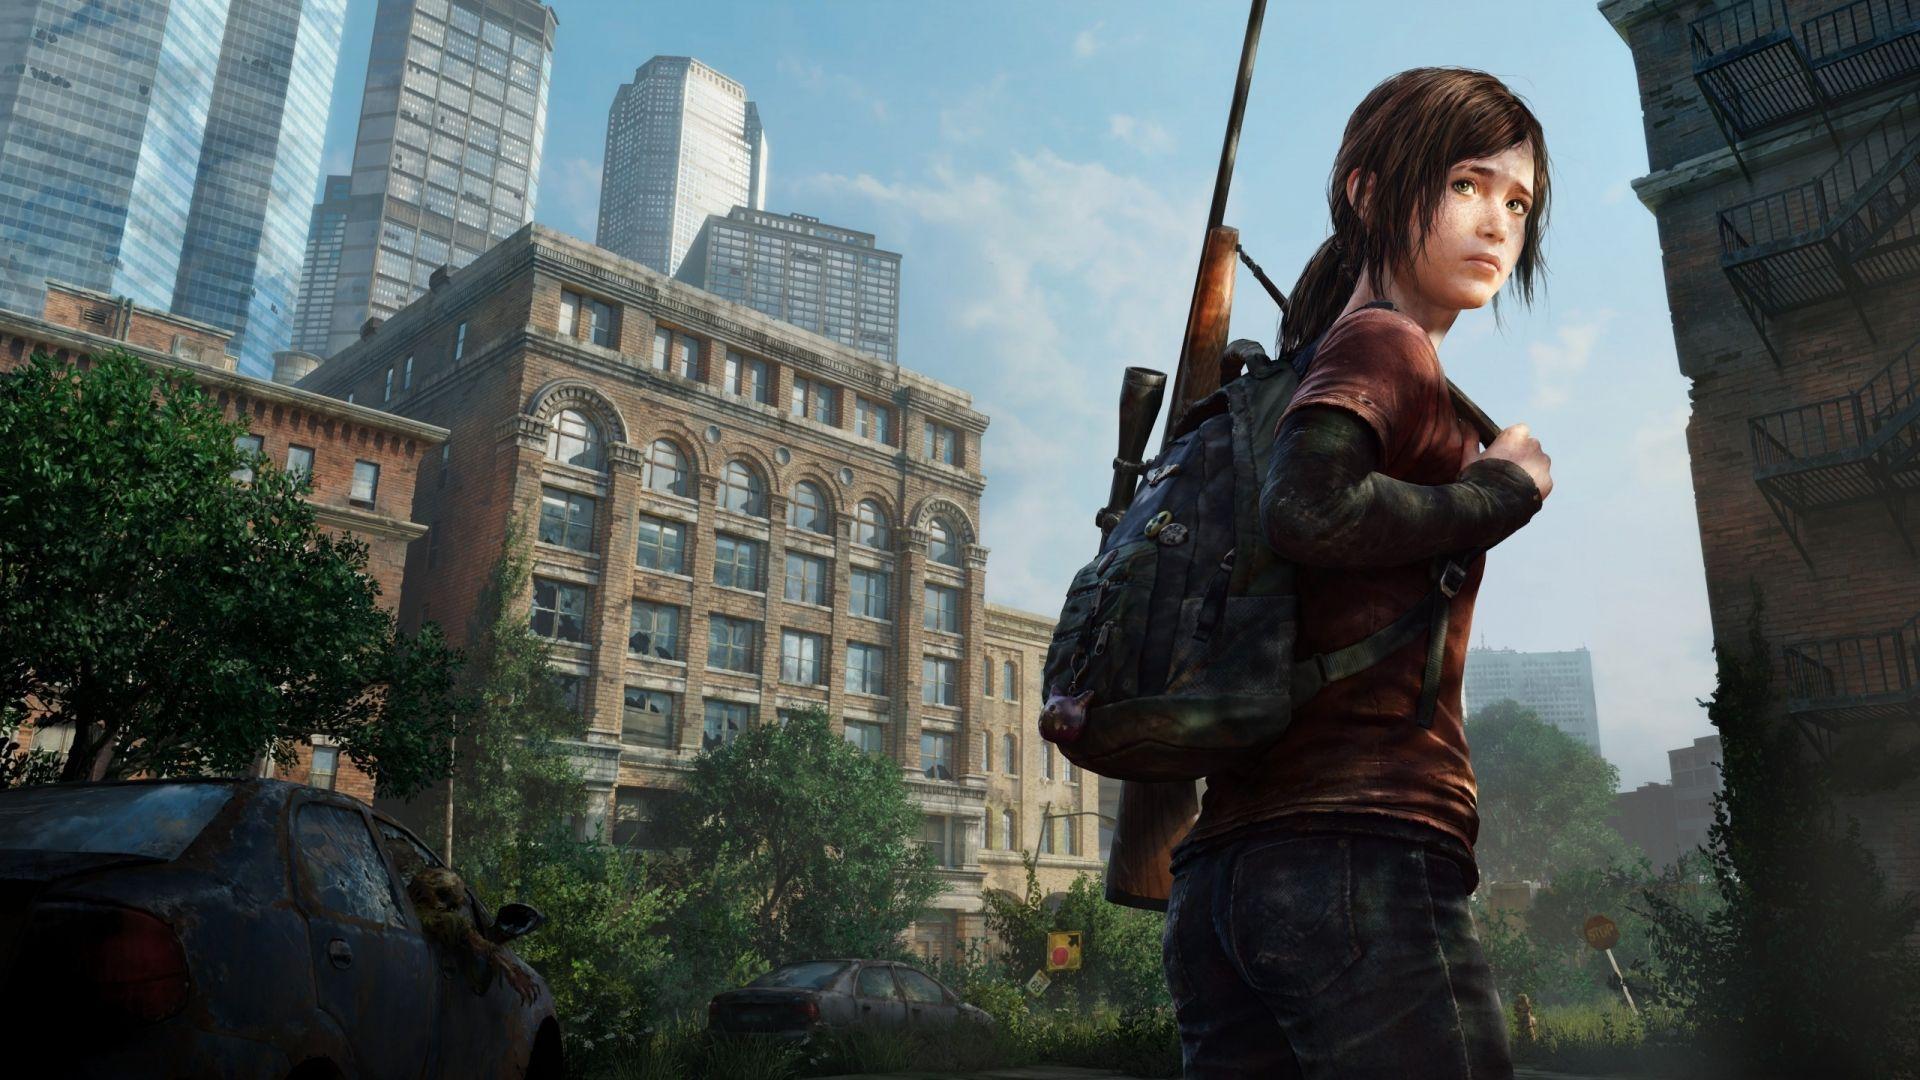 Download Ellie explores the world of The Last Of Us Wallpaper